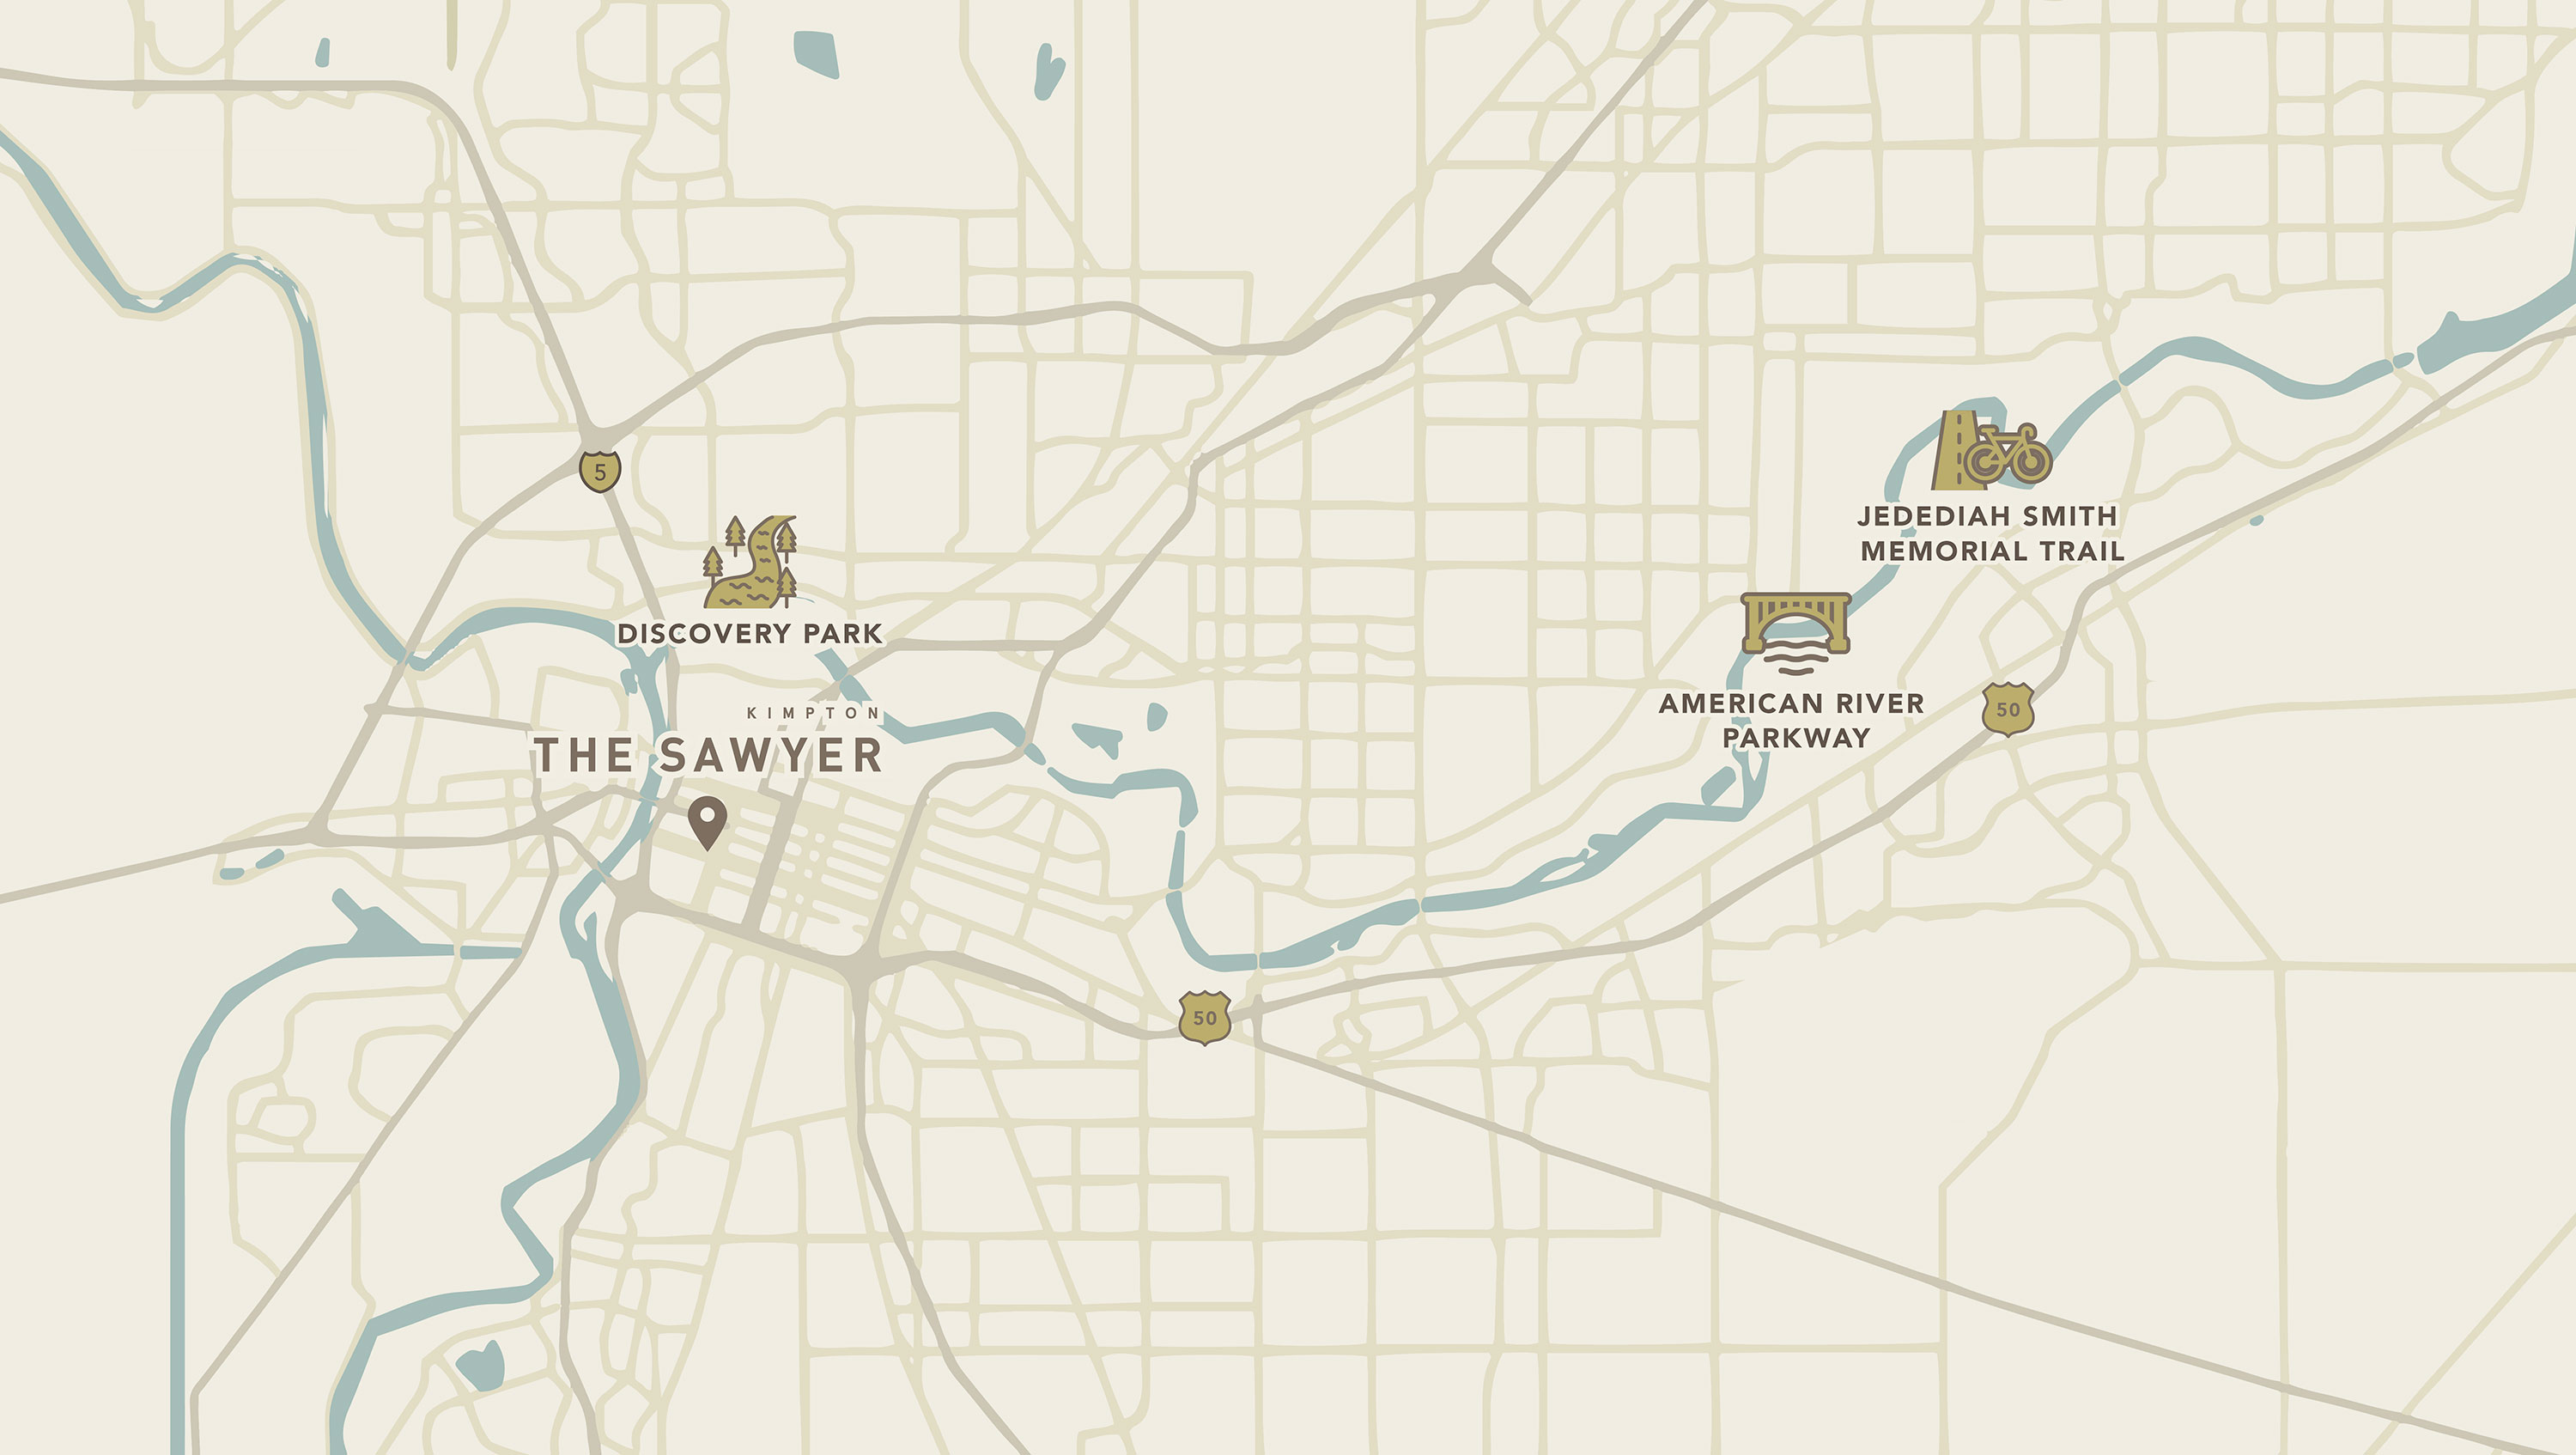 graphical map showing outdoor landmarks